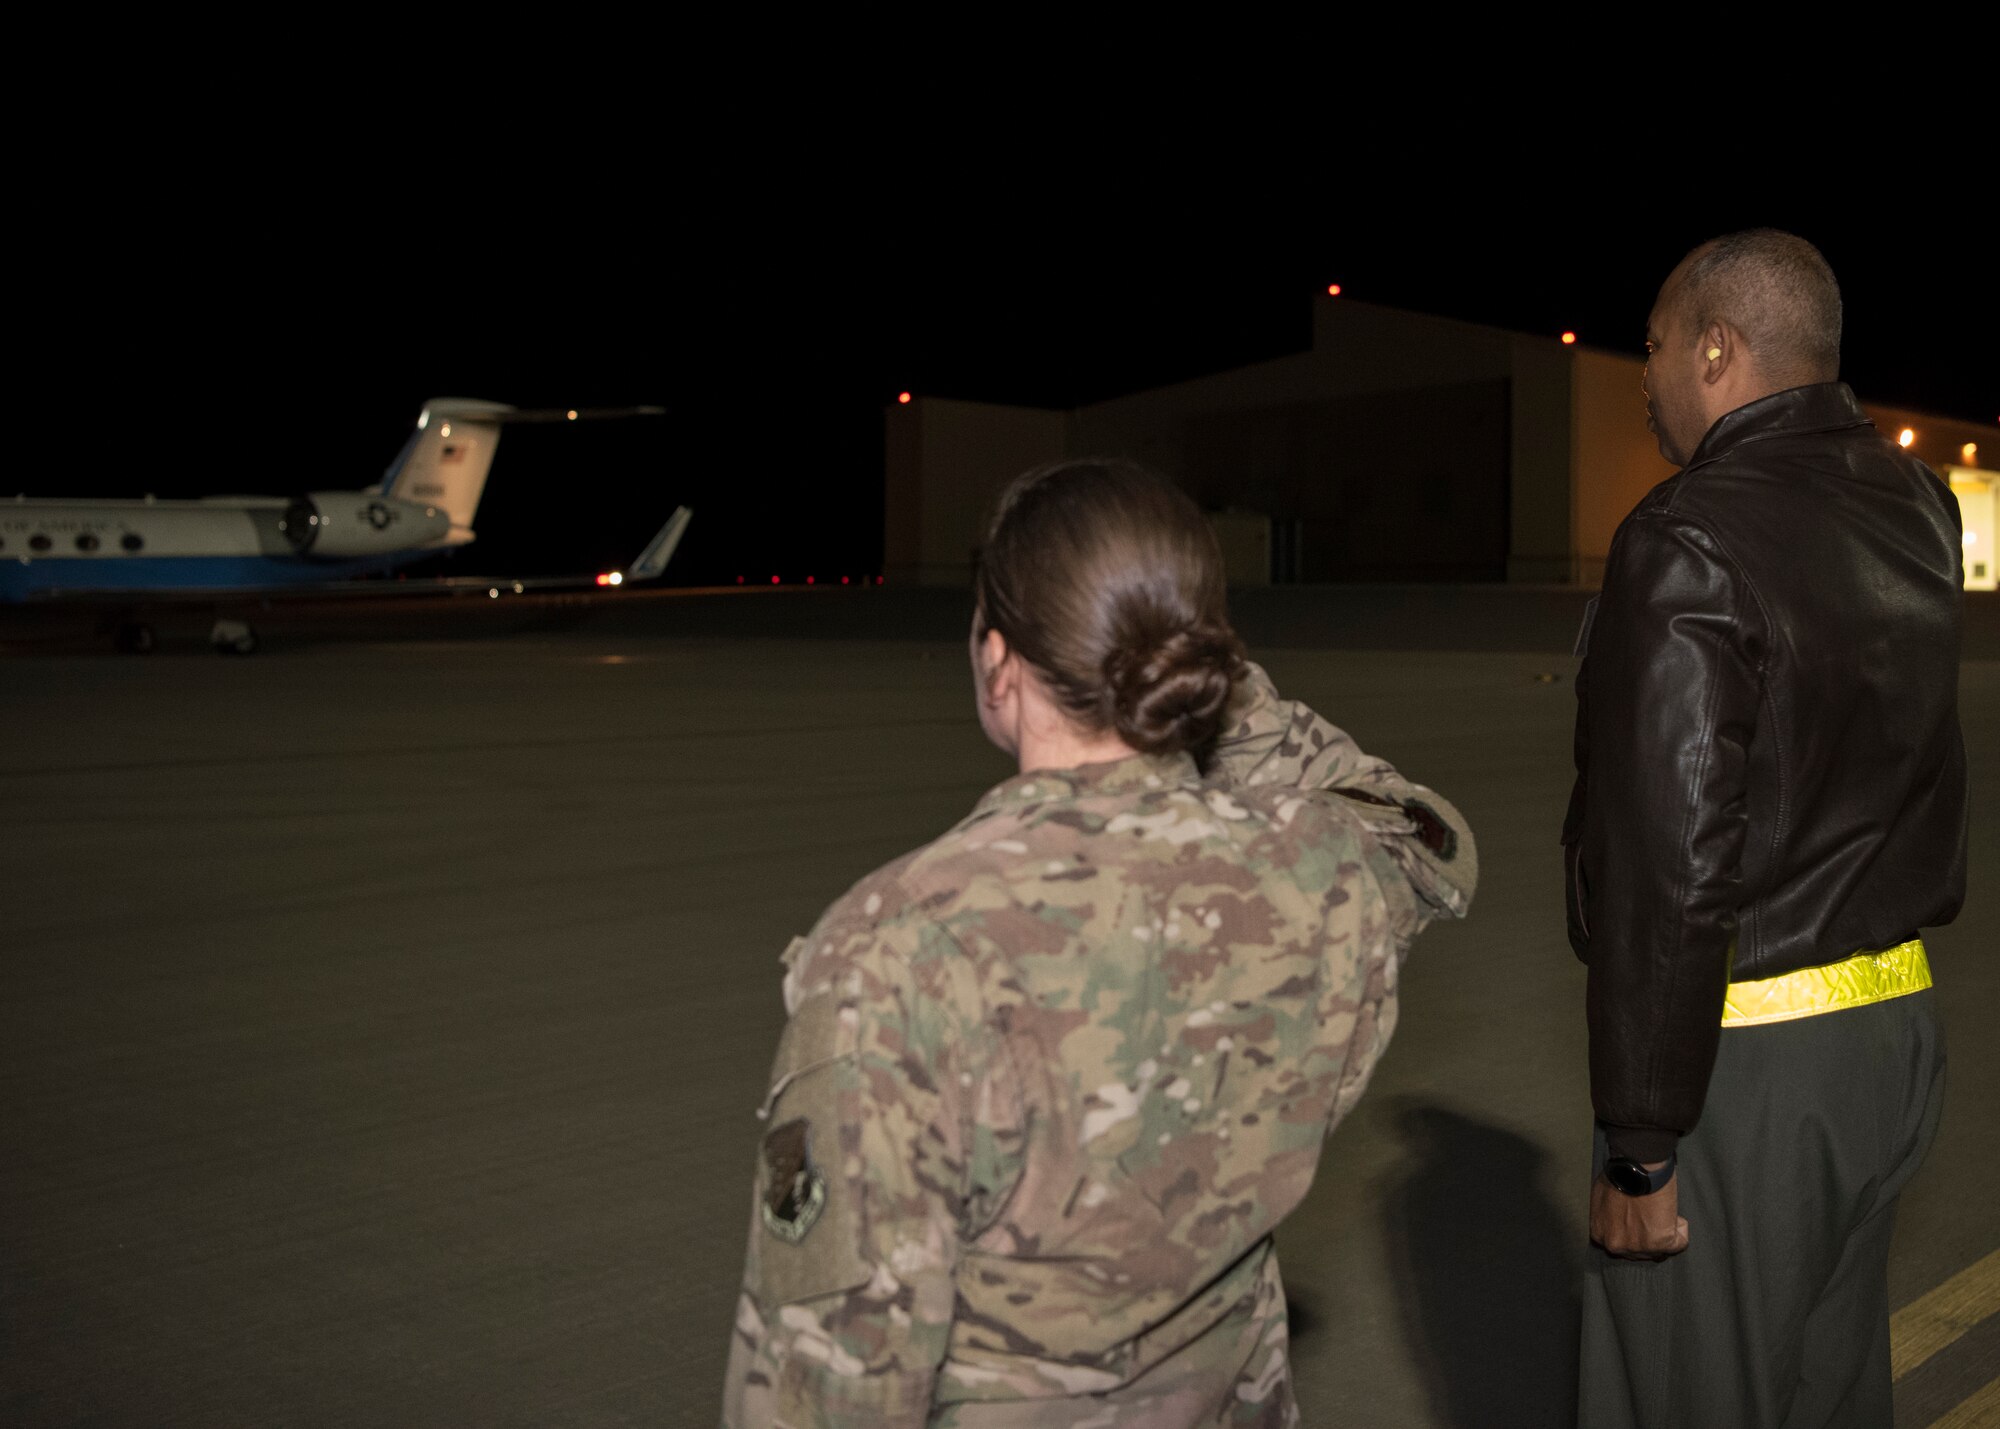 (From left to right) Tech. Sgt. Whitney O’Neill, 49th Wing protocol specialist and Col. Brian Patterson, 49th Wing vice commander, greet the vice chairman of the Joint Chiefs of Staff, upon his arrival at Holloman Air Force Base, N.M., November 13, 2018. Gen. Paul Selva, VCJCS, visited Holloman and White Sands Missile Range November 13 to 14 (U.S. Air Force photo by Staff Sgt. BreeAnn Sachs).